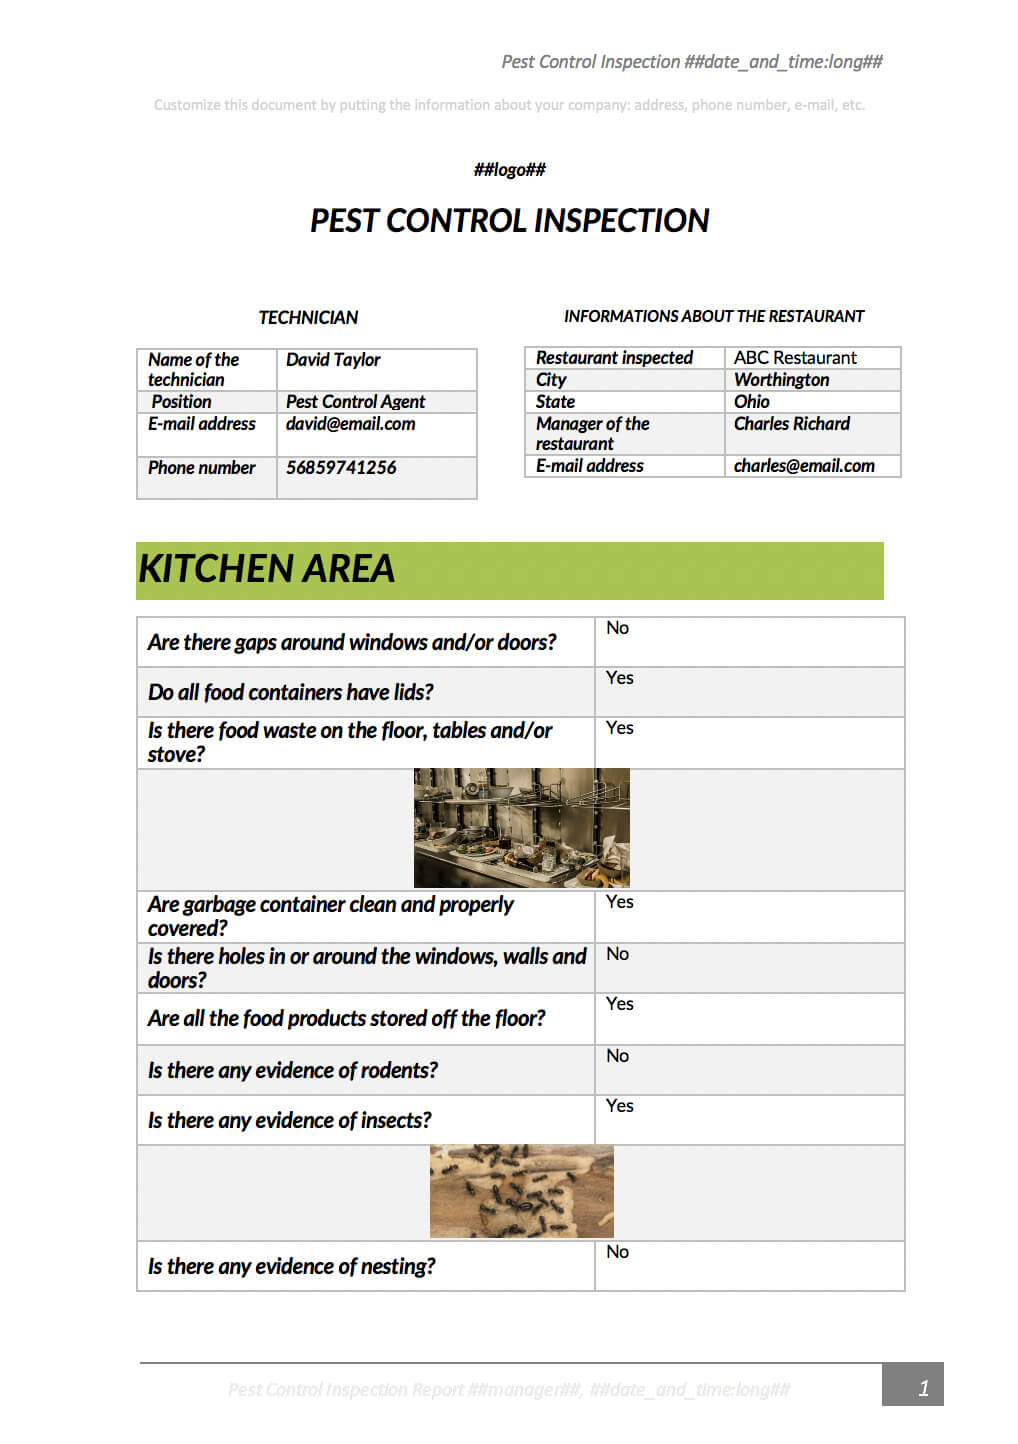 Pest Control Inspection With Kizeo Forms From Your Cellphone With Regard To Pest Control Inspection Report Template